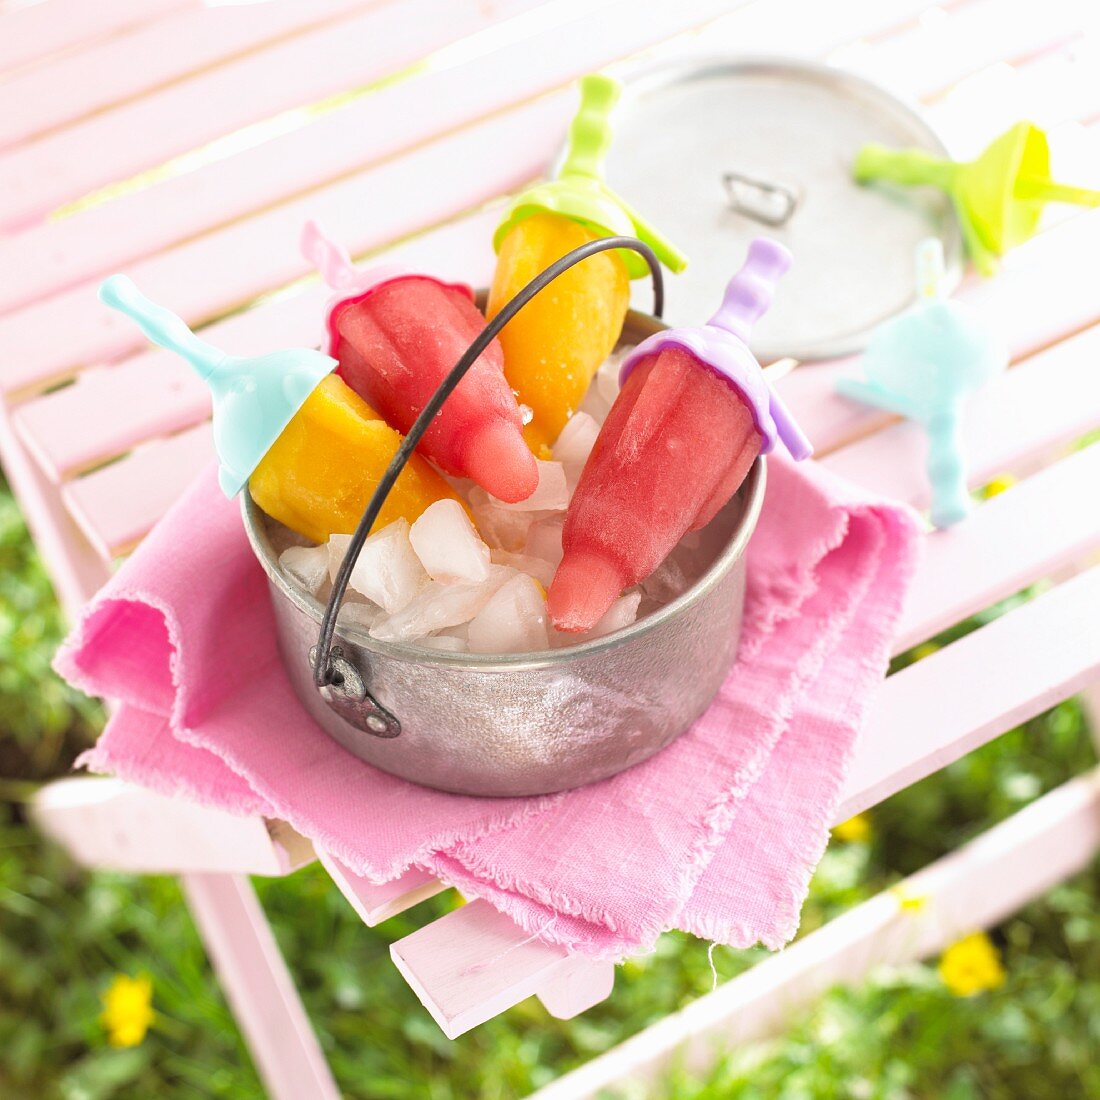 Fruit ice lollies for children's birthday party